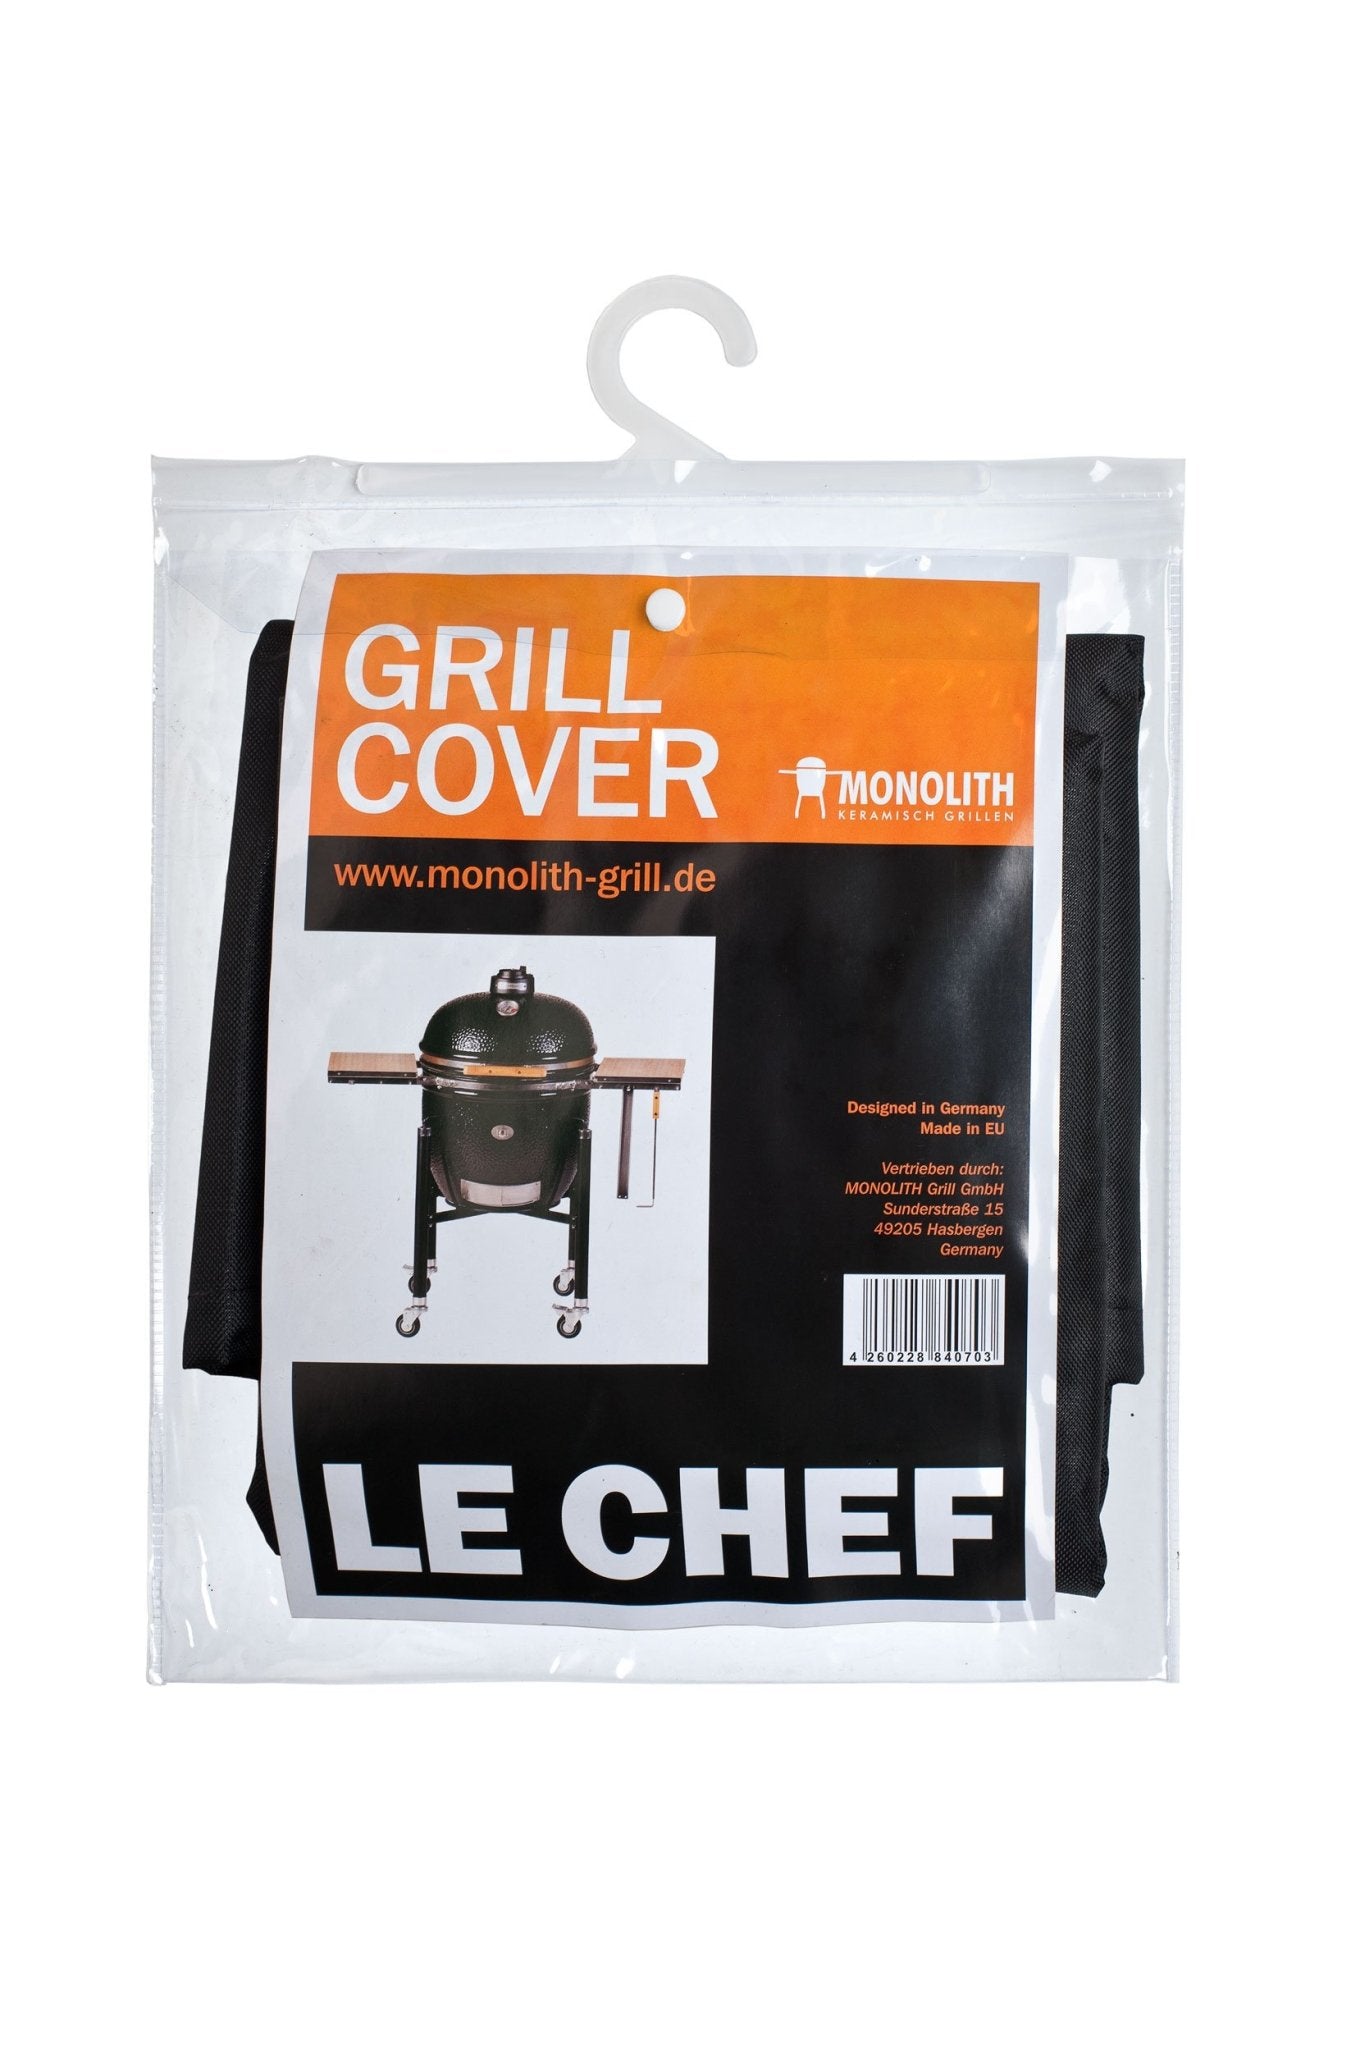 elk Expertise Keuze MONOLITH Kamado BBQ Grill Cover - FireFly Barbecue